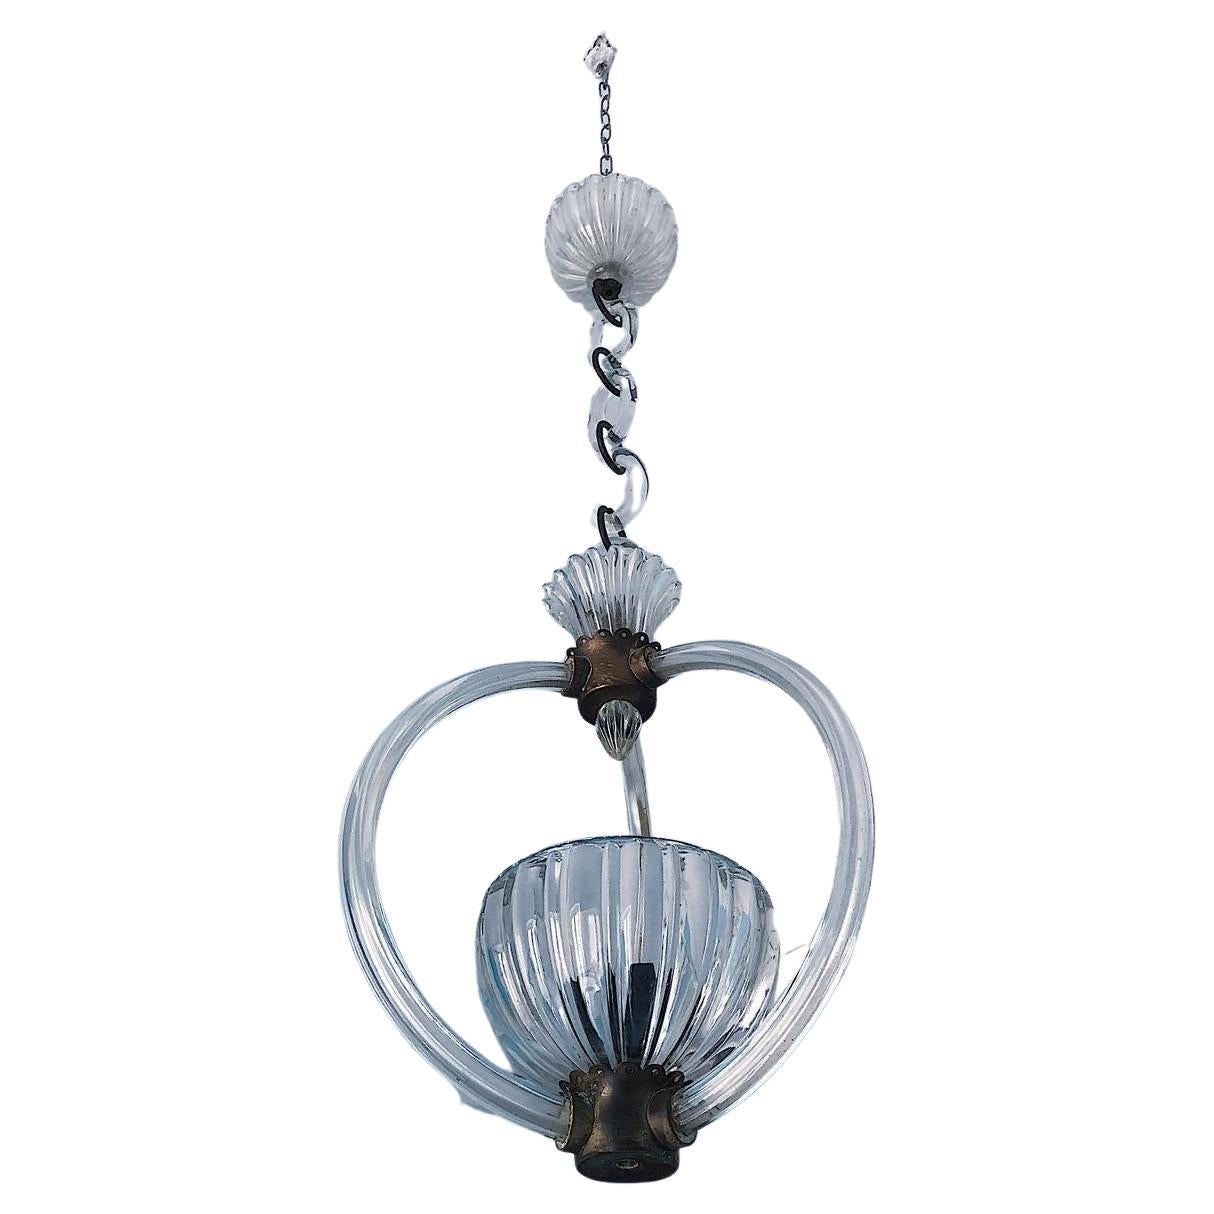 1930s Murano glass chandelier by Barovier&Toso